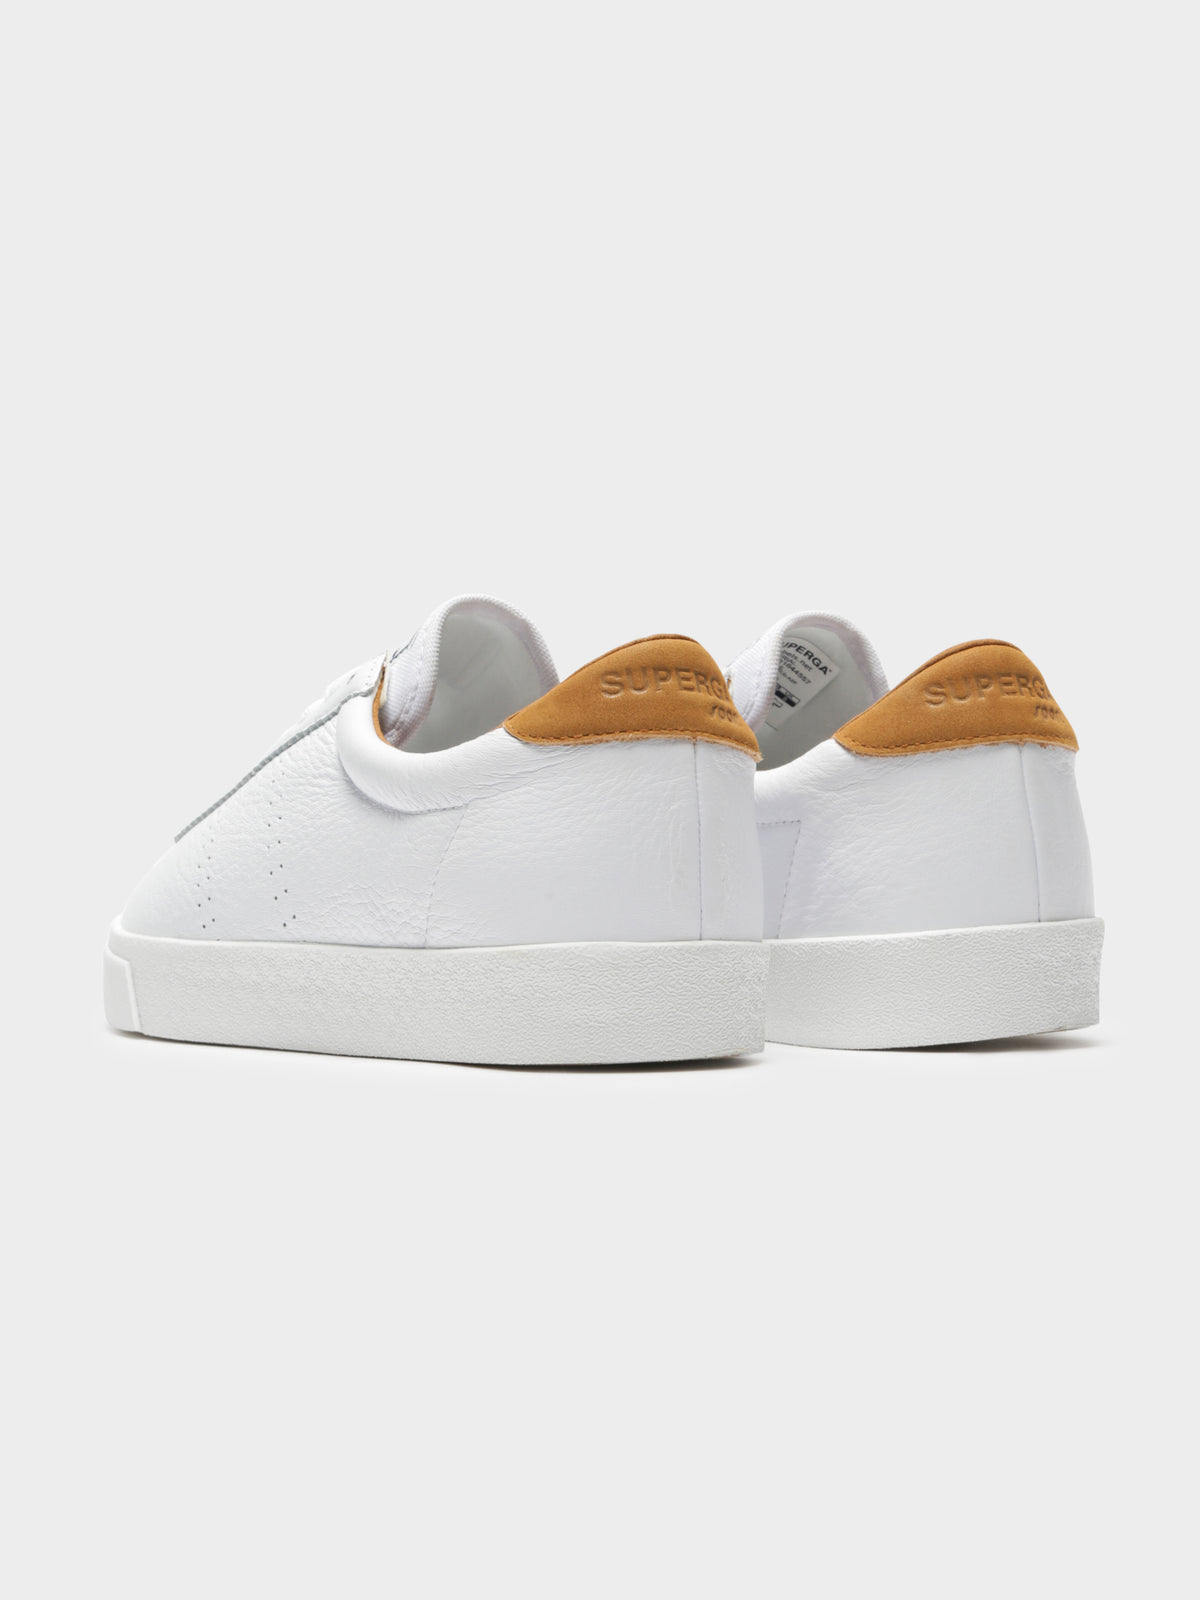 2843 Clubs Comfleau Sneakers in White &amp; Brown